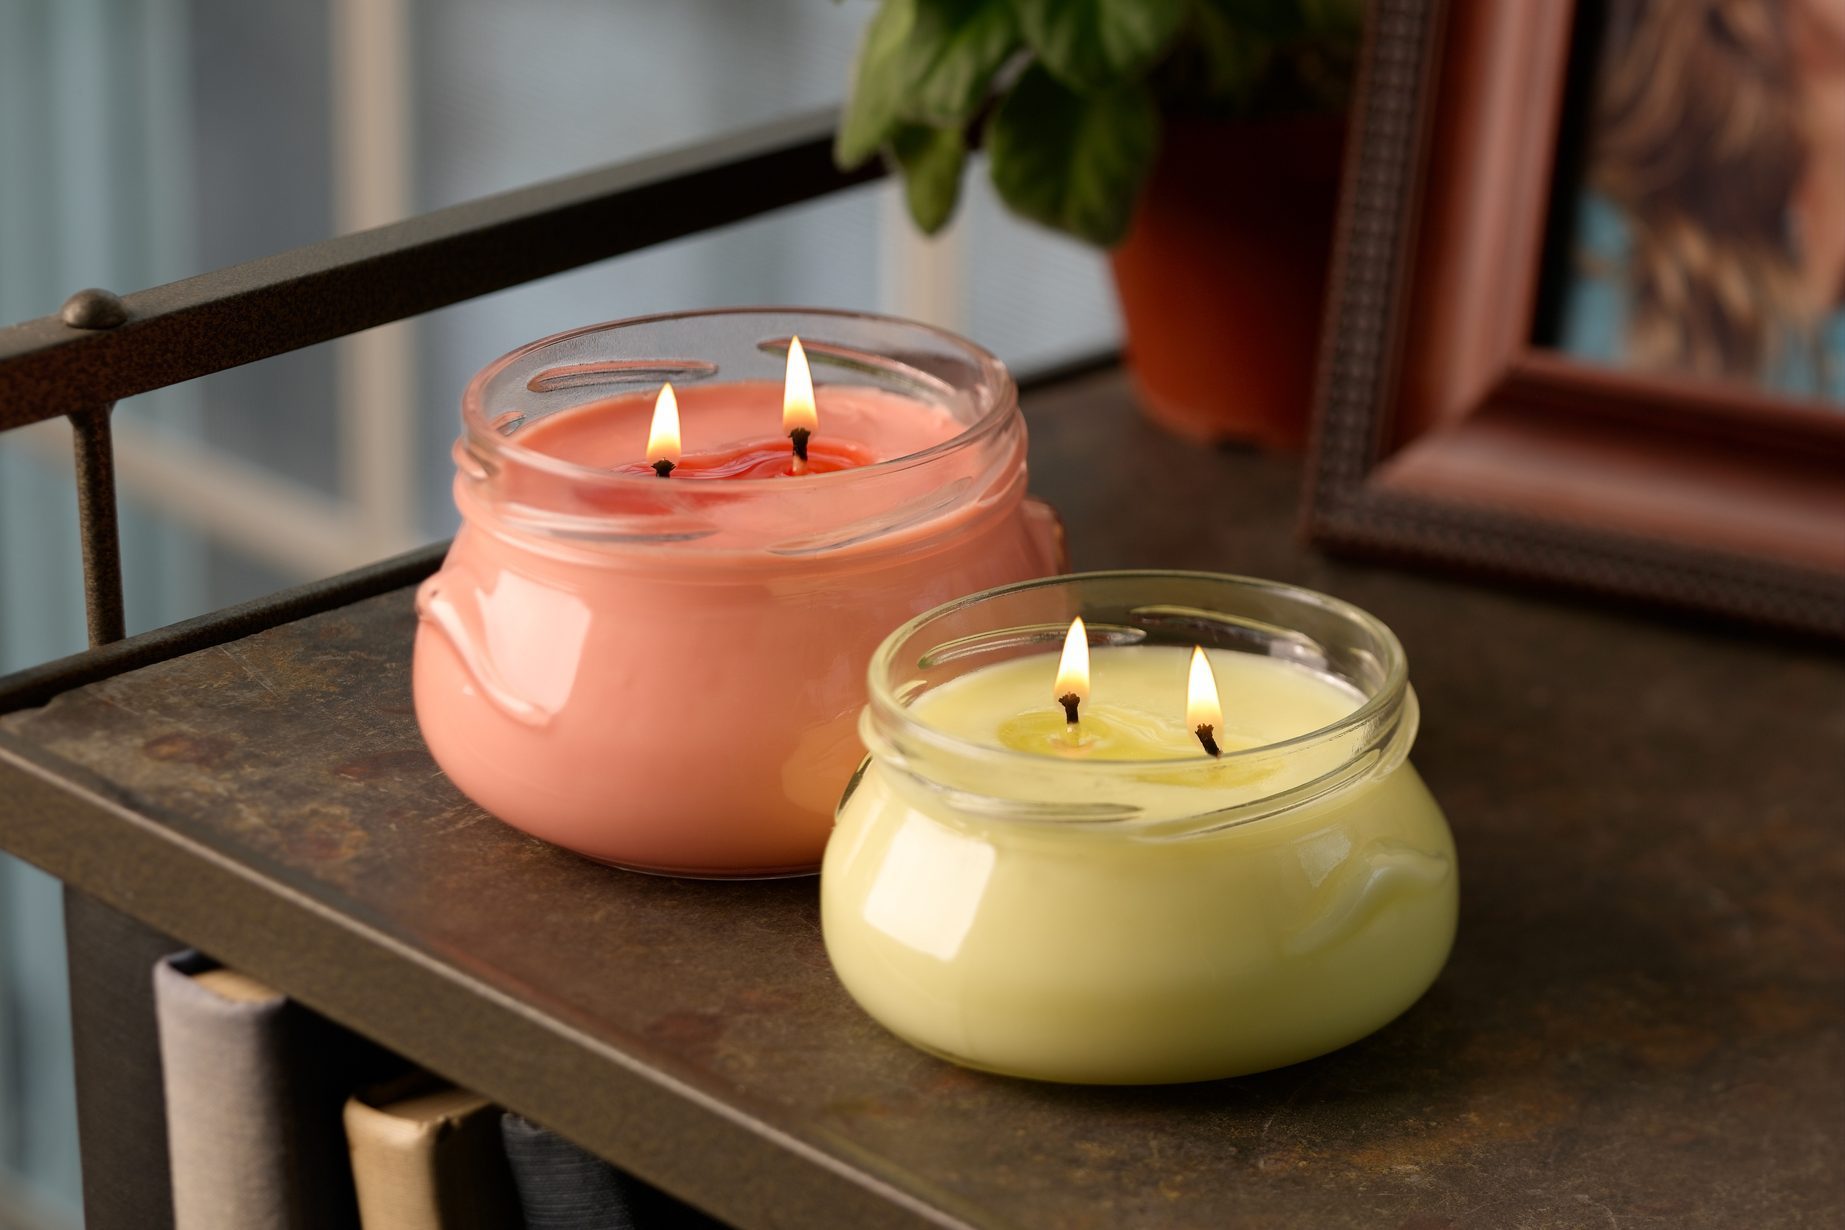 Scentsy Wax is a safe alternative to candles - flame, soot & toxin